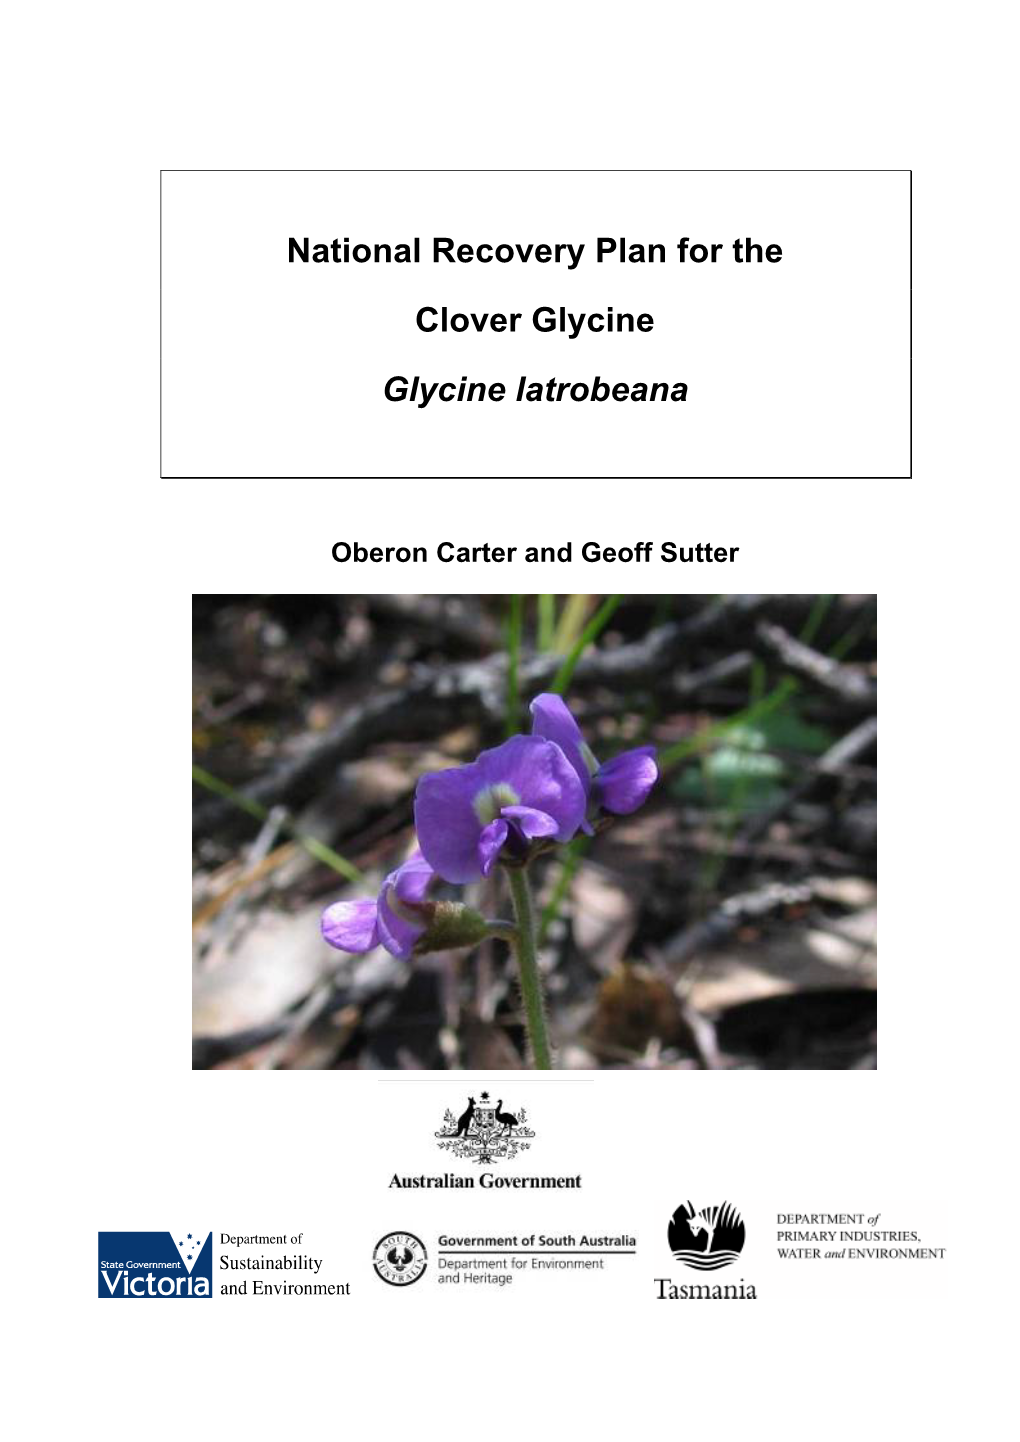 National Recovery Plan for the Clover Glycine